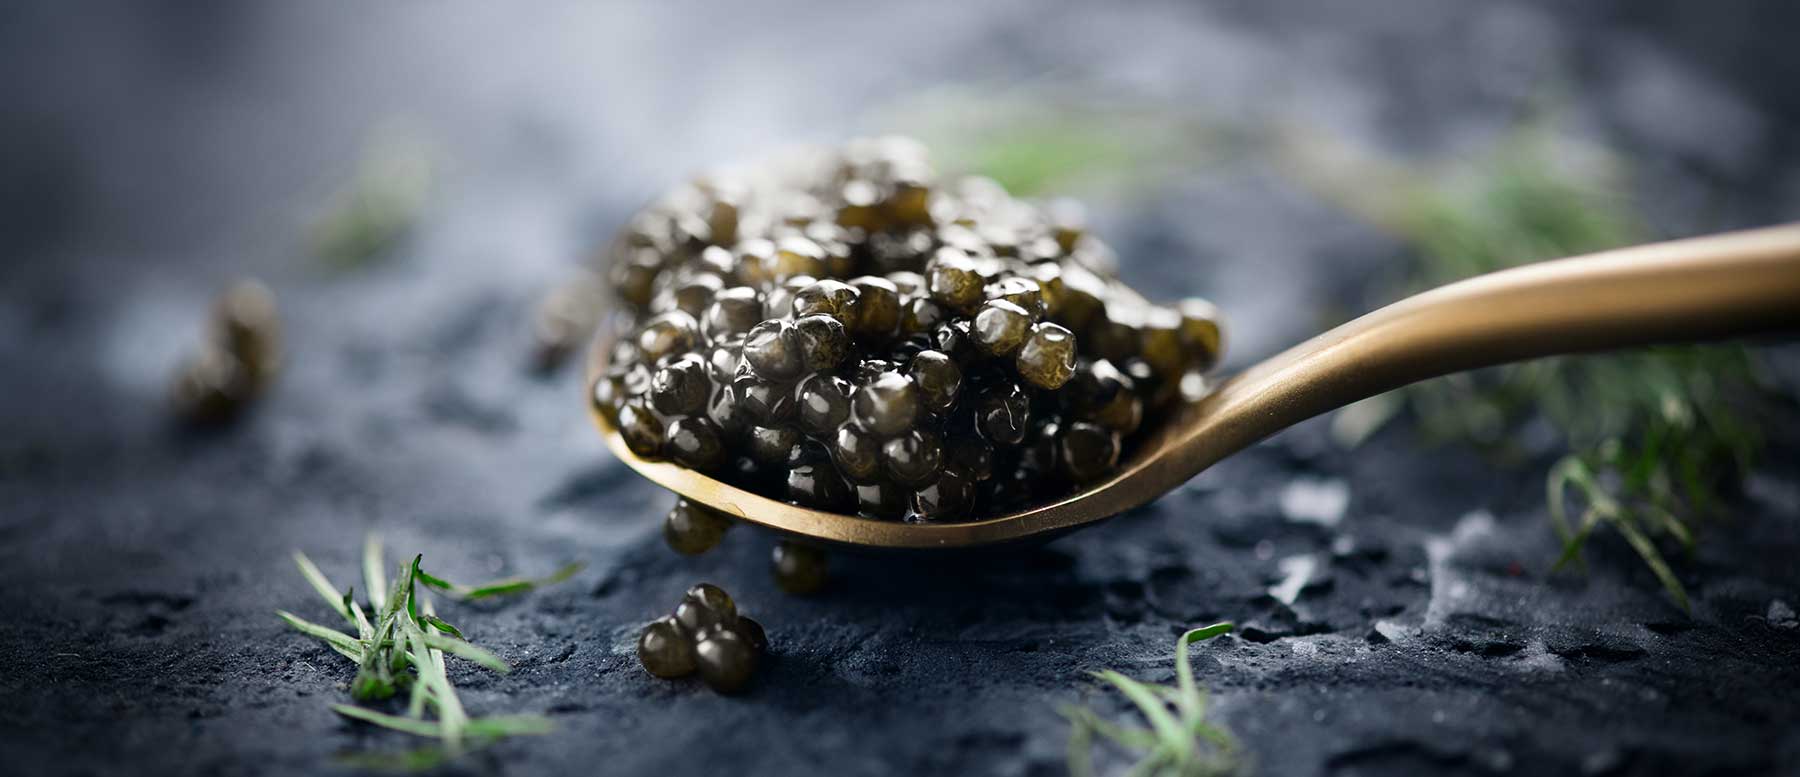 All about caviar: from the different types to the price of the world's most expensive one